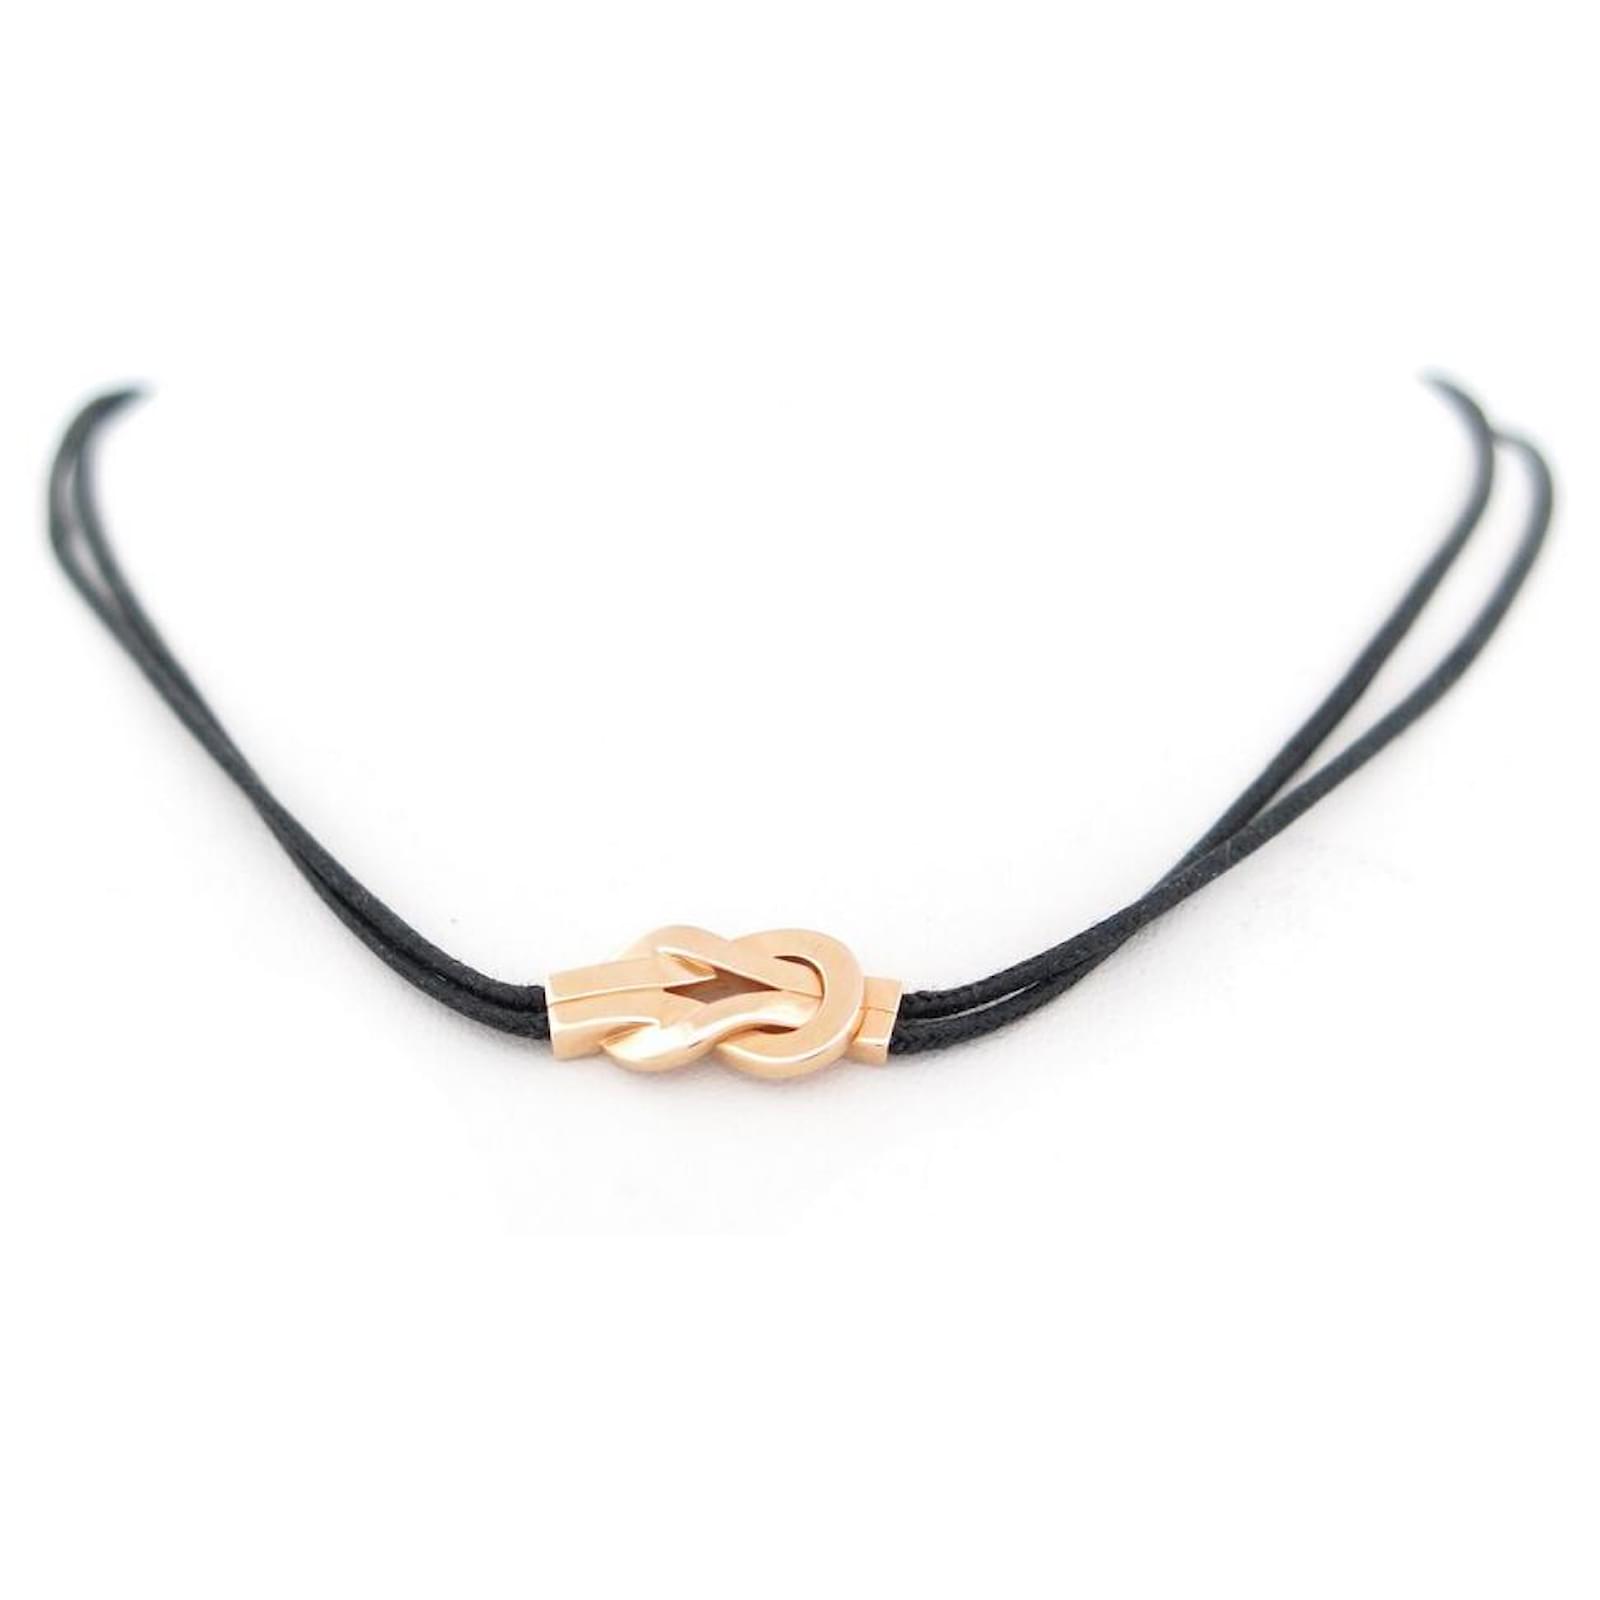 NEW NECKLACE FRED CHANCE INFINIE ROSE GOLD RAS DU NECK CORDON